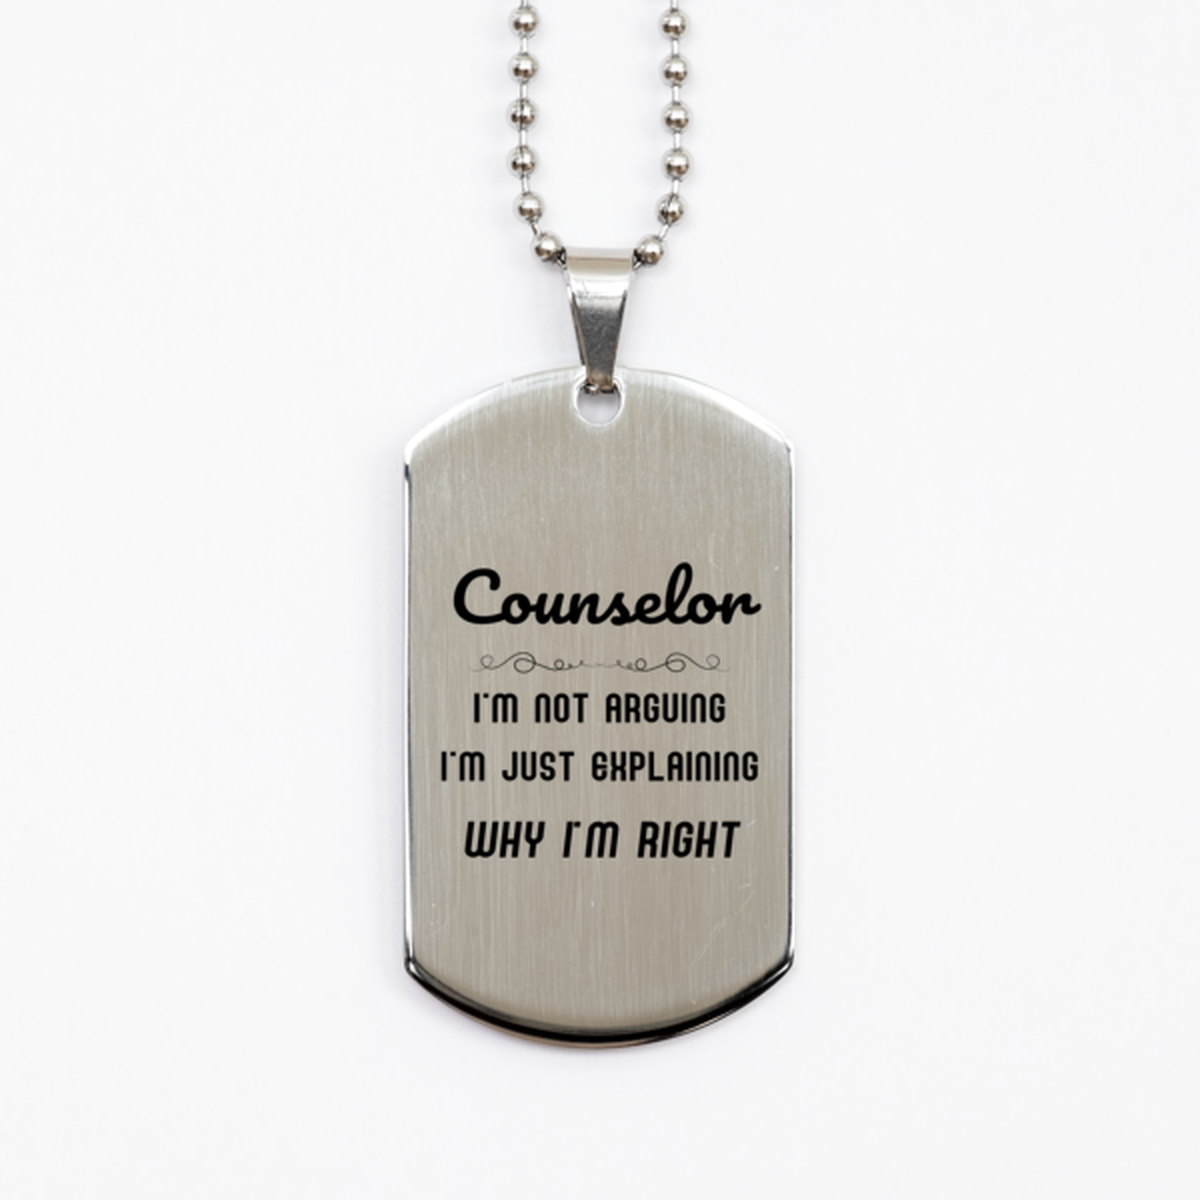 Counselor I'm not Arguing. I'm Just Explaining Why I'm RIGHT Silver Dog Tag, Funny Saying Quote Counselor Gifts For Counselor Graduation Birthday Christmas Gifts for Men Women Coworker